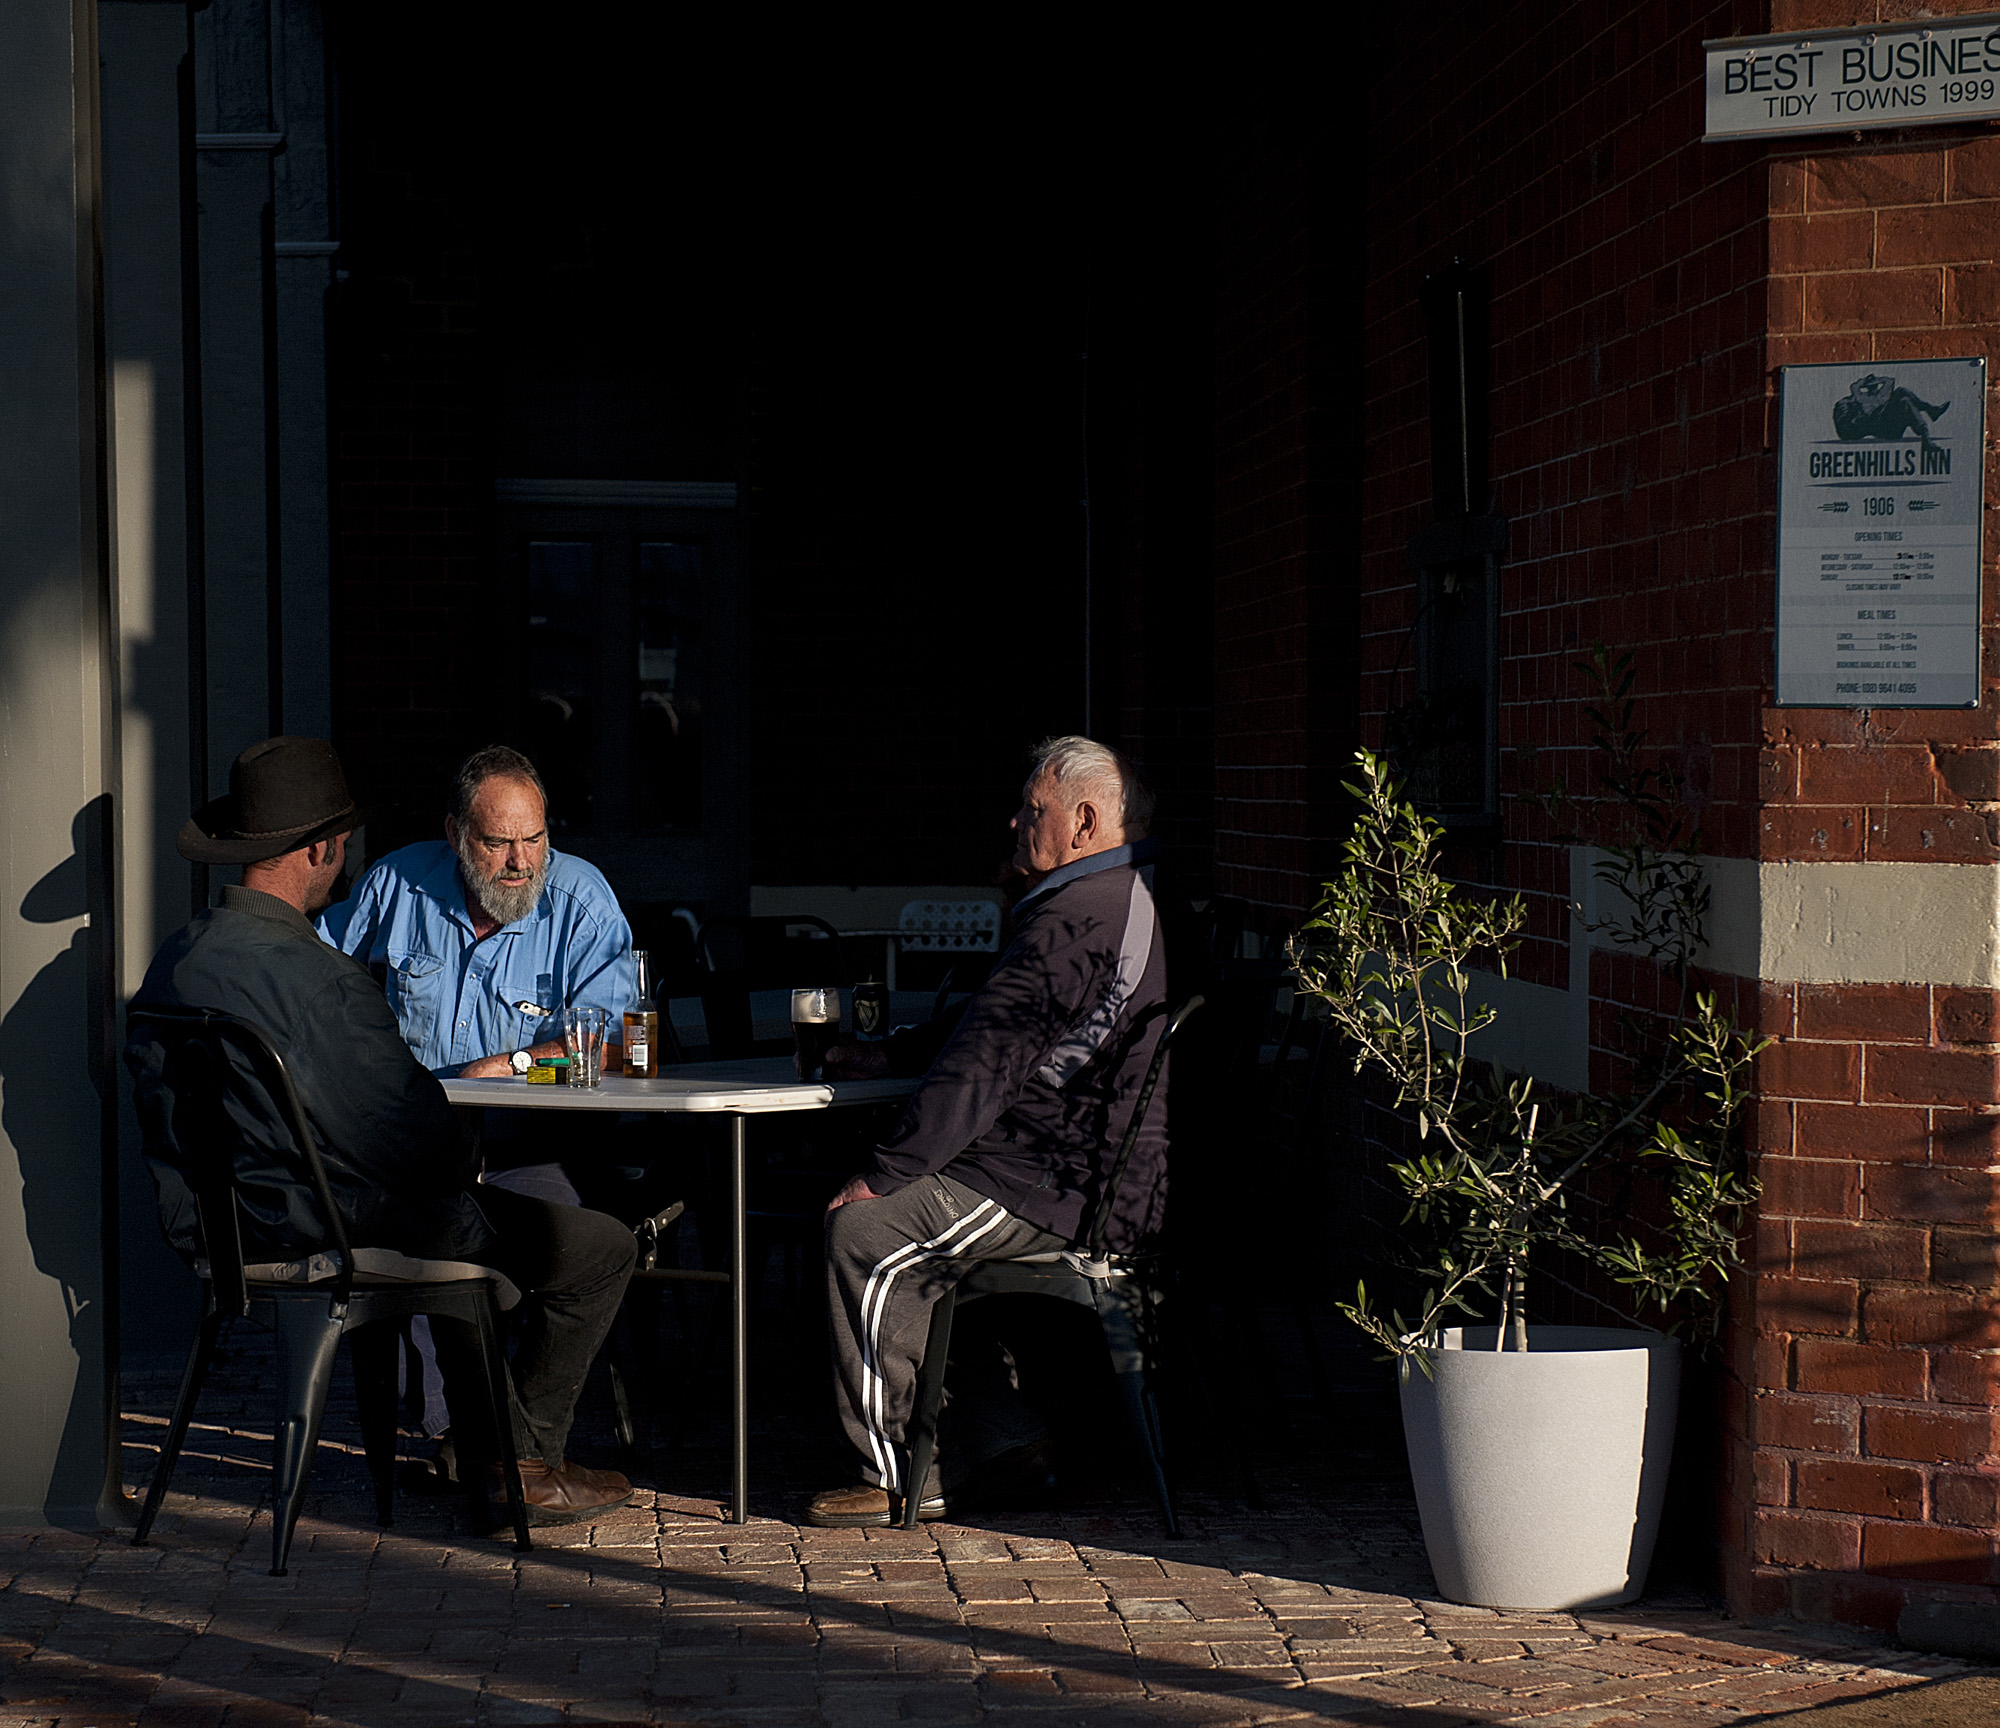 locals having a beer near the front door outside.jpg